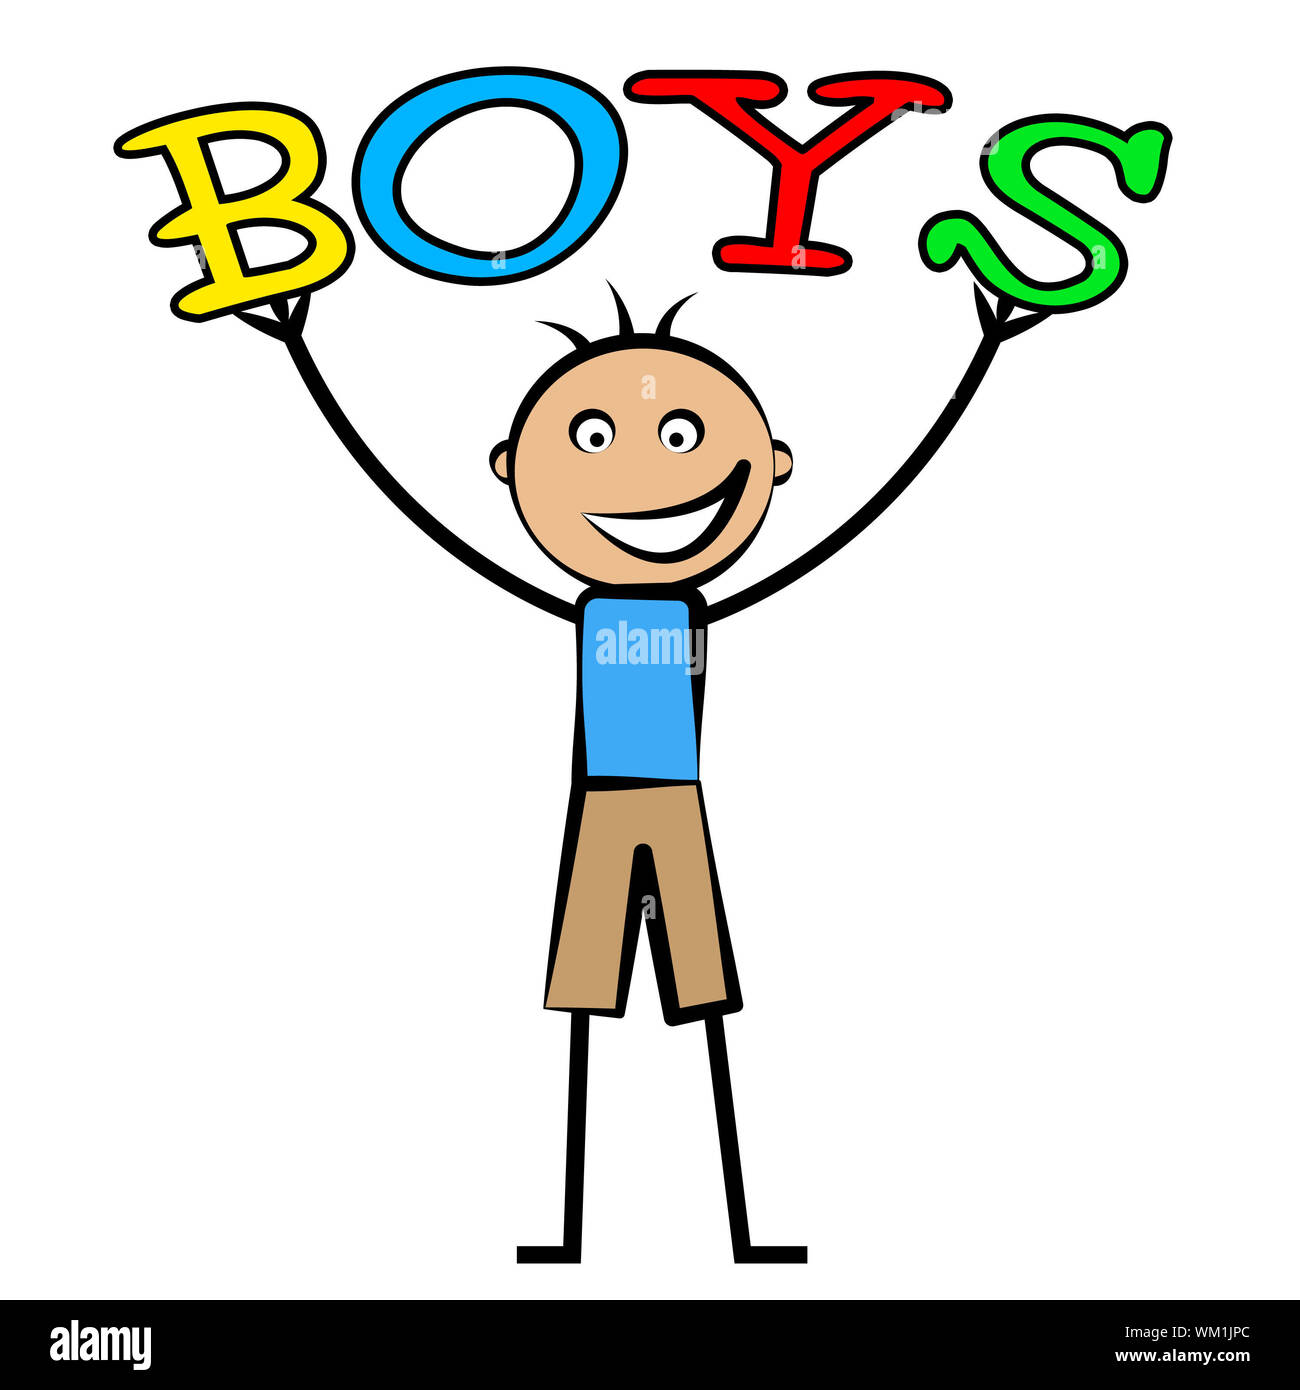 Boys Word Representing Male Youngster And Youth Stock Photo